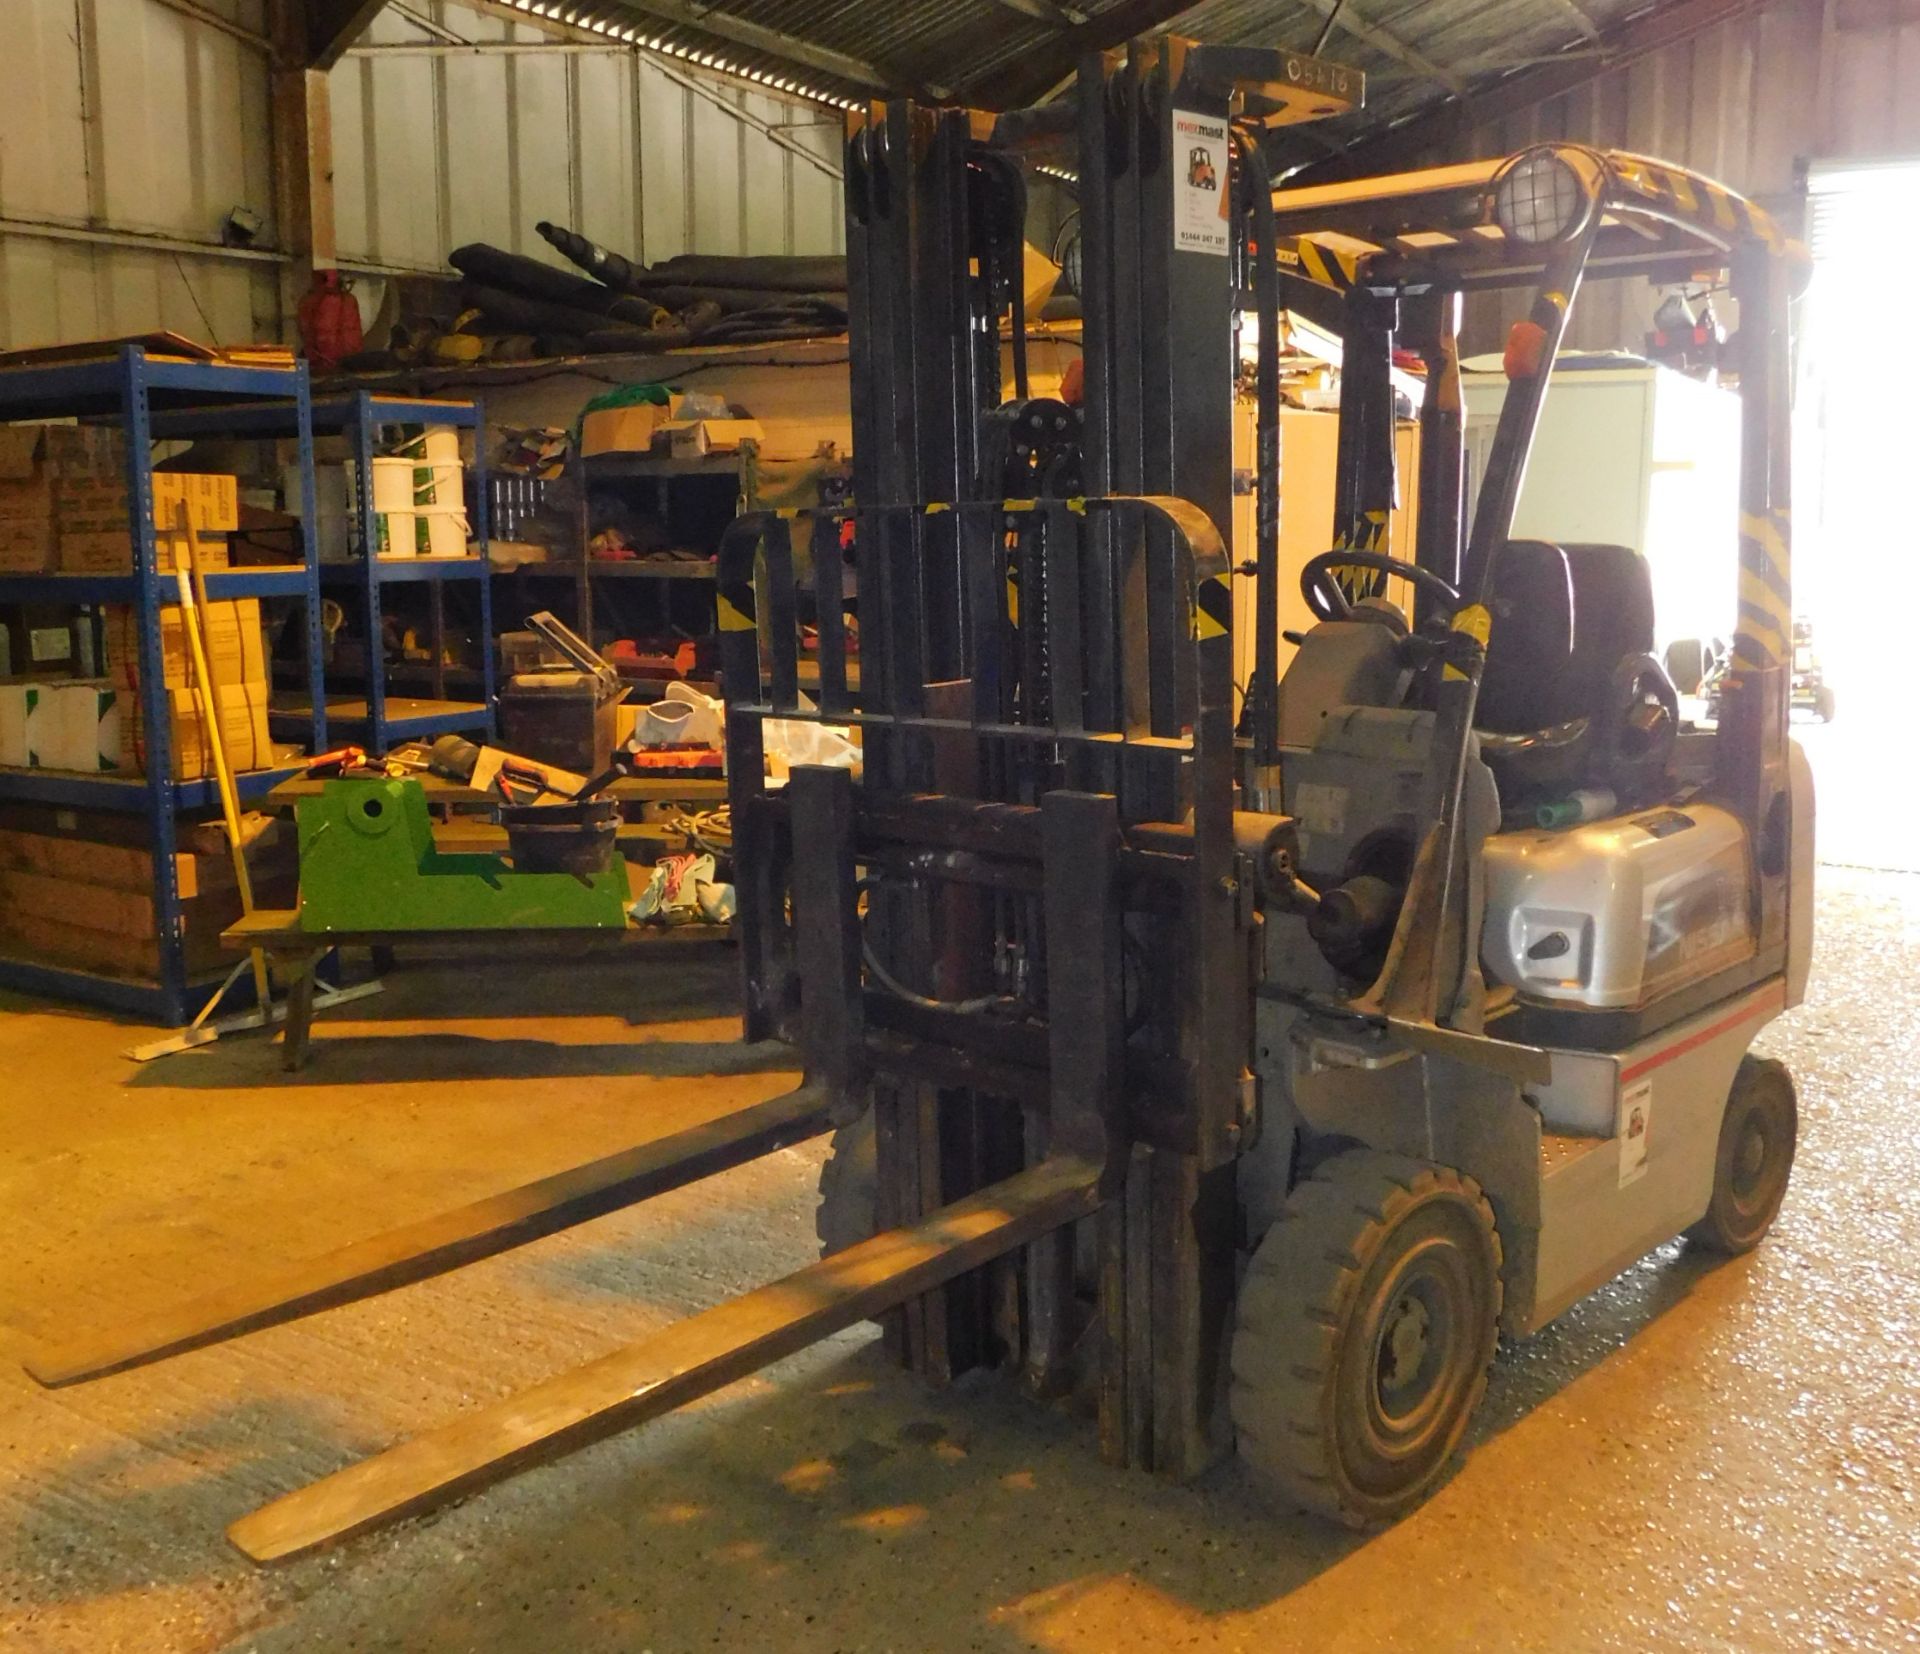 Nissan Type Y1D1A18Q Diesel Fork Lift Truck (2008), Serial Number Y1D1E700/131 with Sideshift, Rated